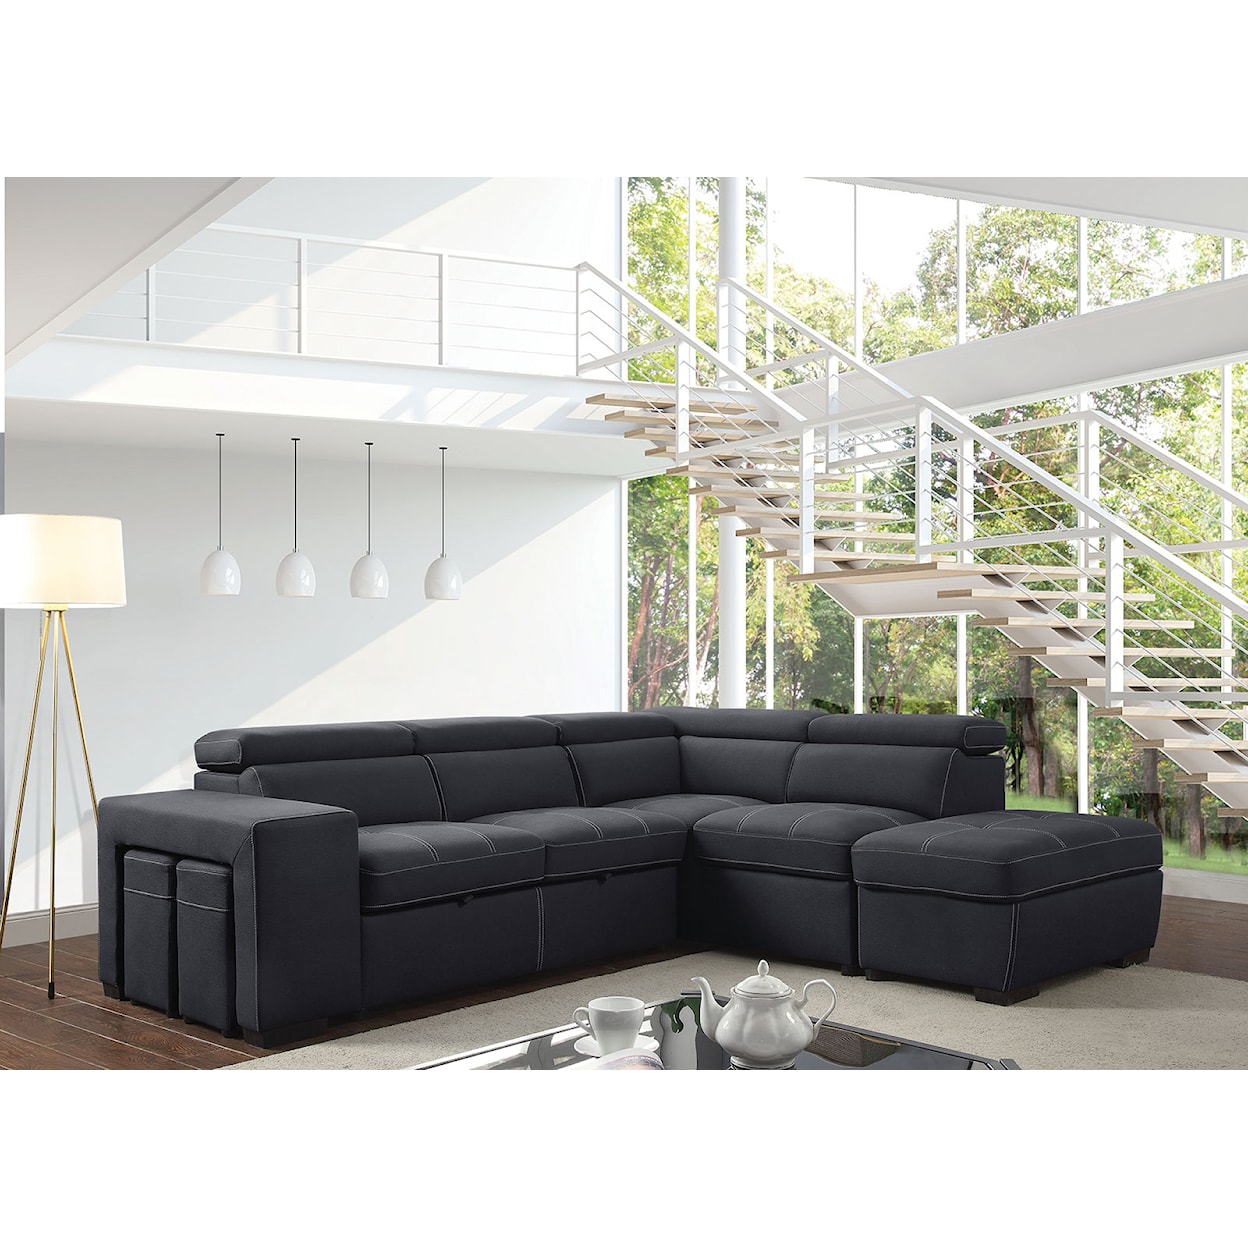 Furniture of America Athene 3-Piece Sectional